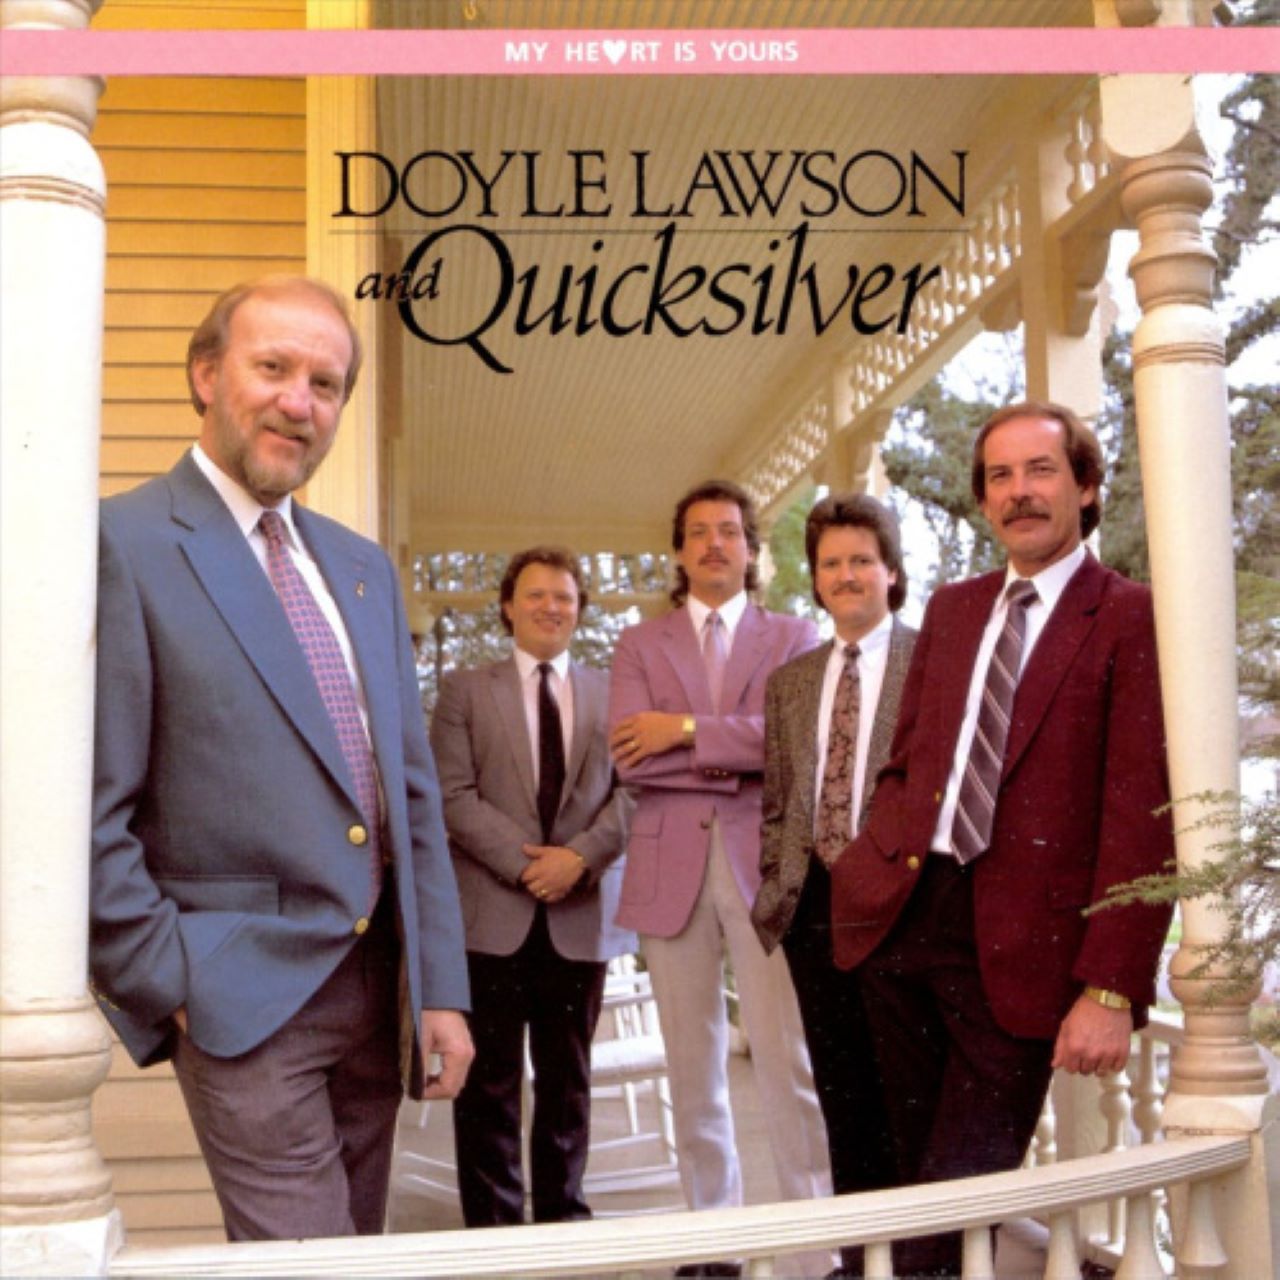 Doyle Lawson & Quicksilver - My Heart Is Yours cover album